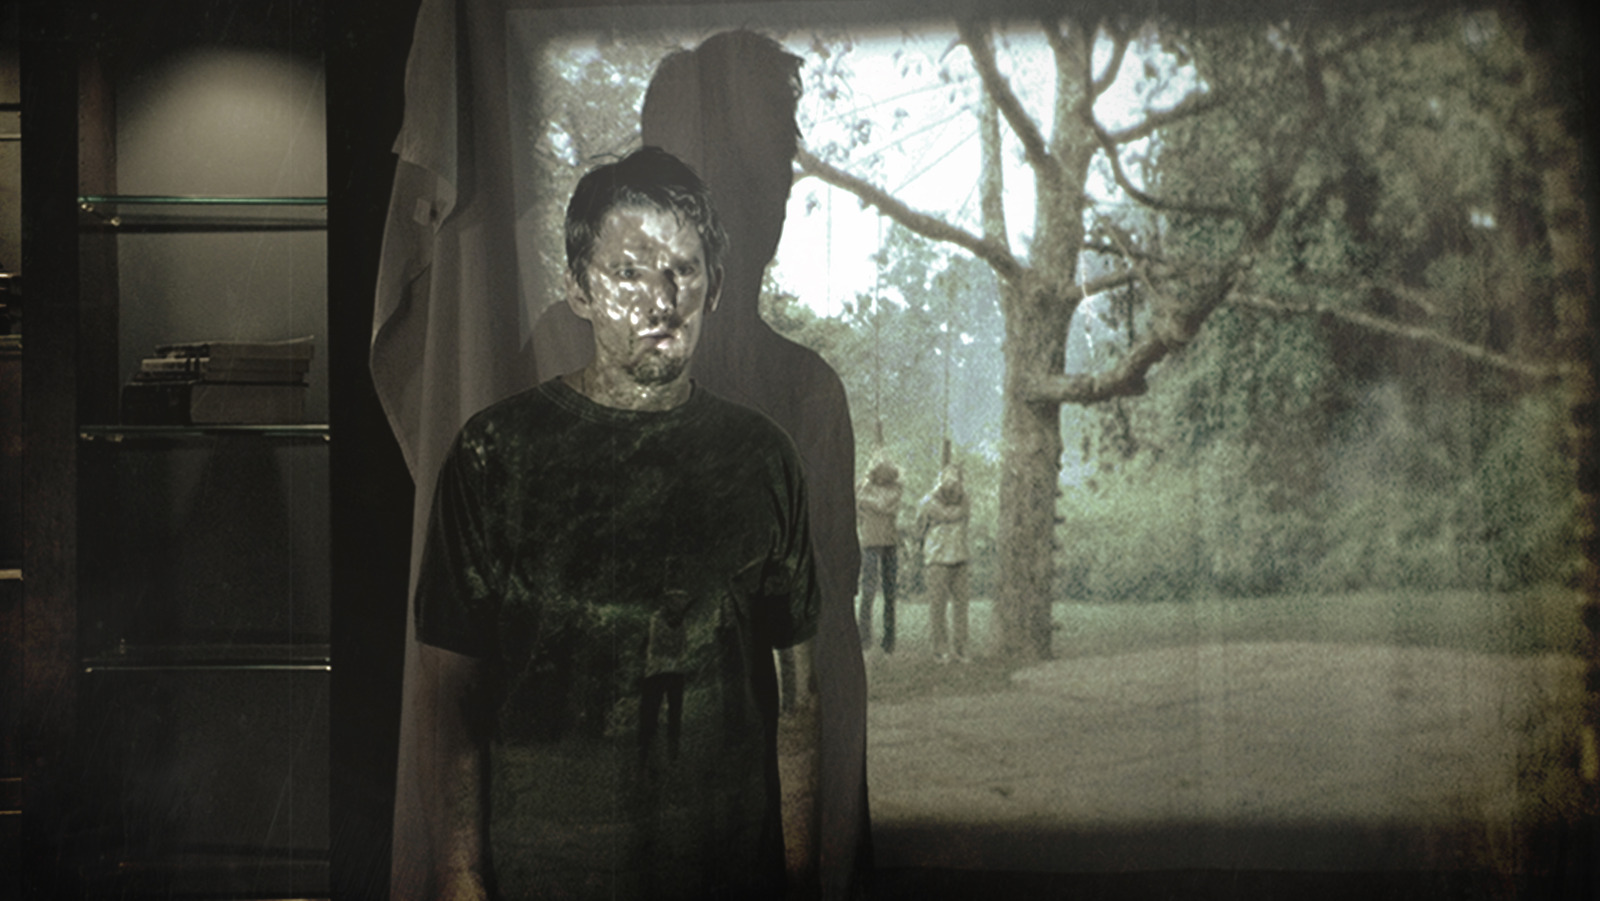 How One Cut Sinister Scene Ended Up In Sinister 2 [Exclusive]